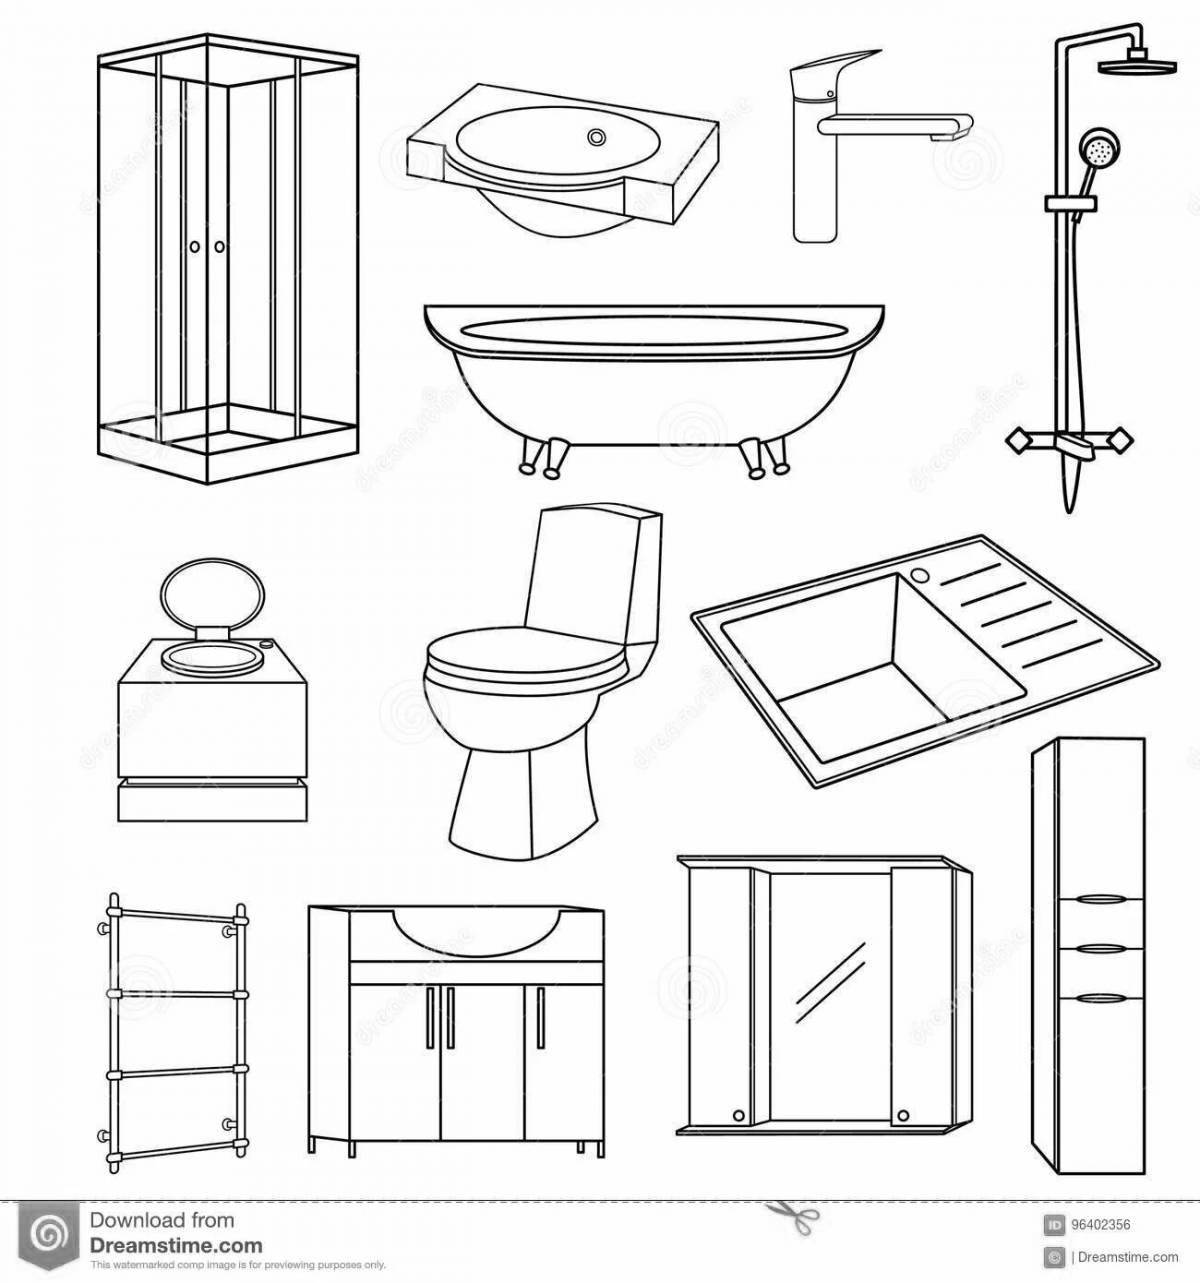 Coloring page of the current Grand Boca bath